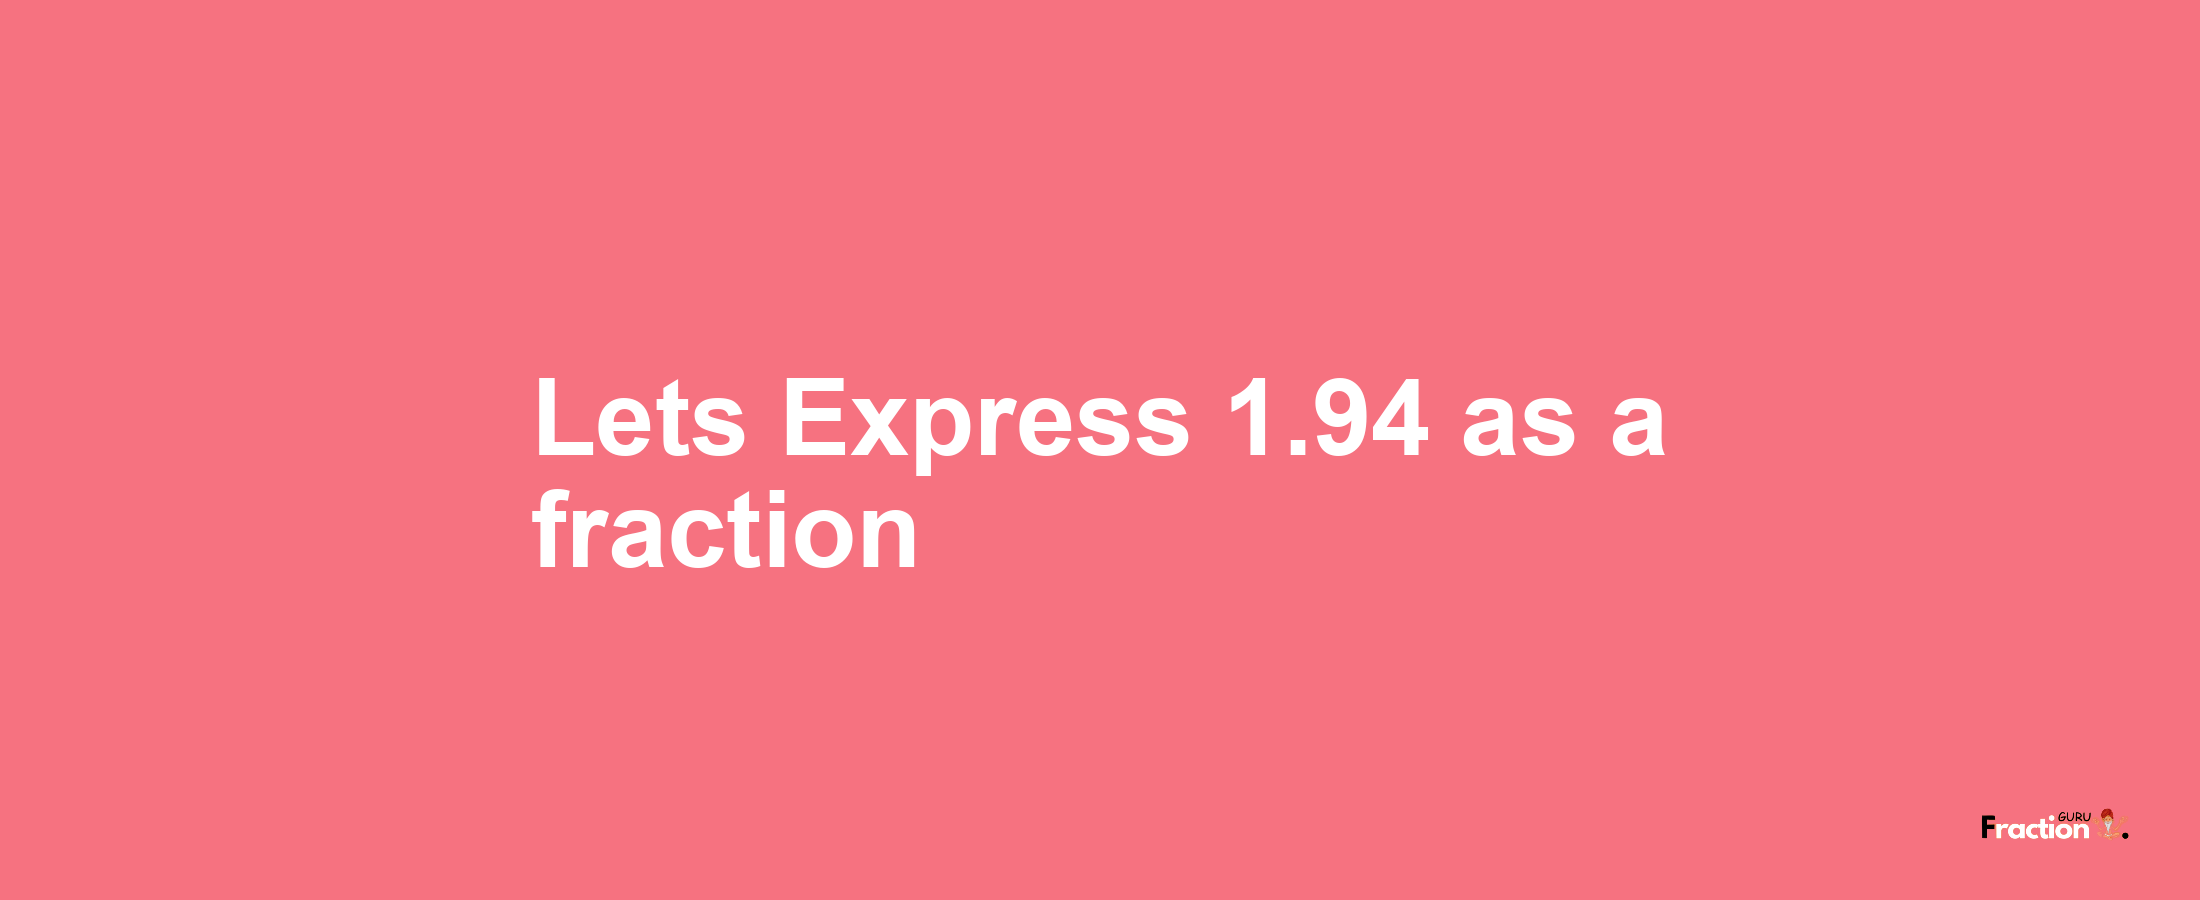 Lets Express 1.94 as afraction